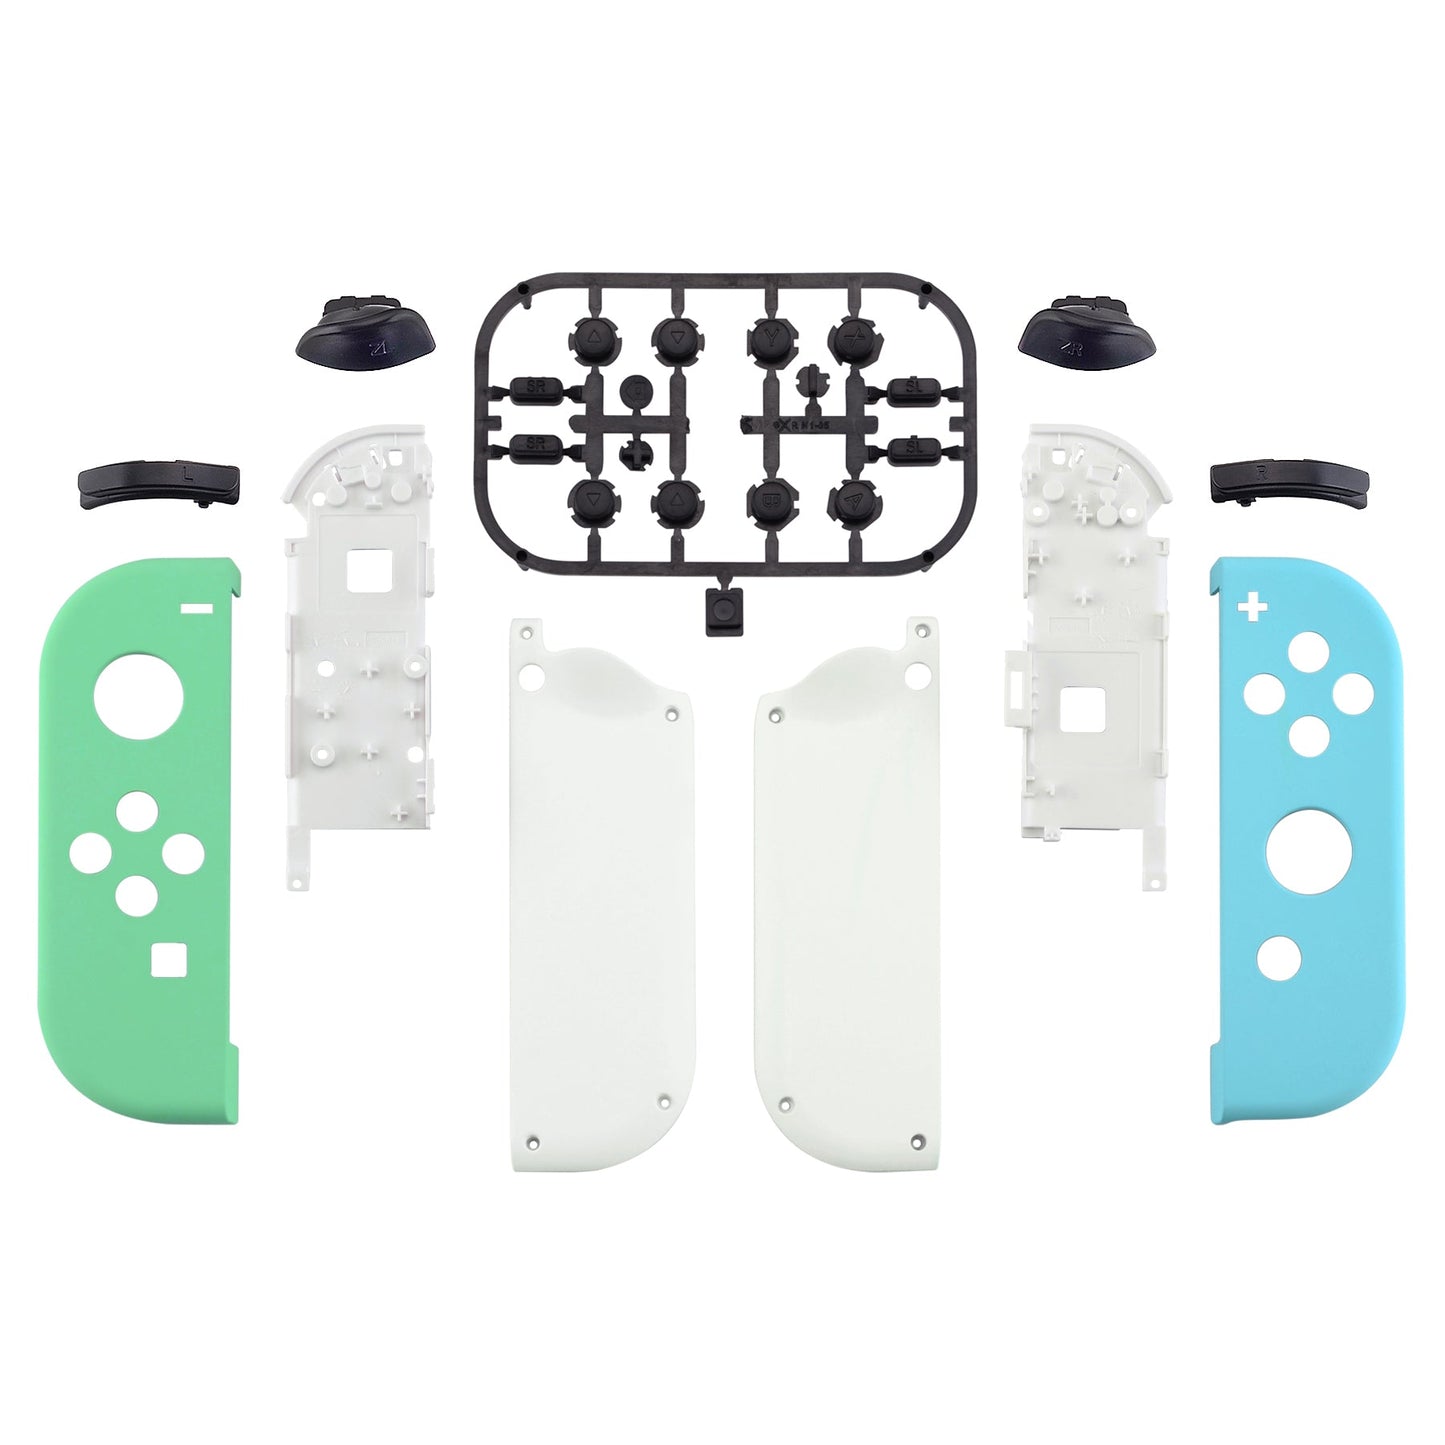 eXtremeRate Retail Soft Touch Grip Mint Green & Heaven Blue Housing with Full Set Buttons, DIY Replacement Shell Case for NS Switch JoyCon & OLED JoyCon - Console Shell NOT Included - CP317